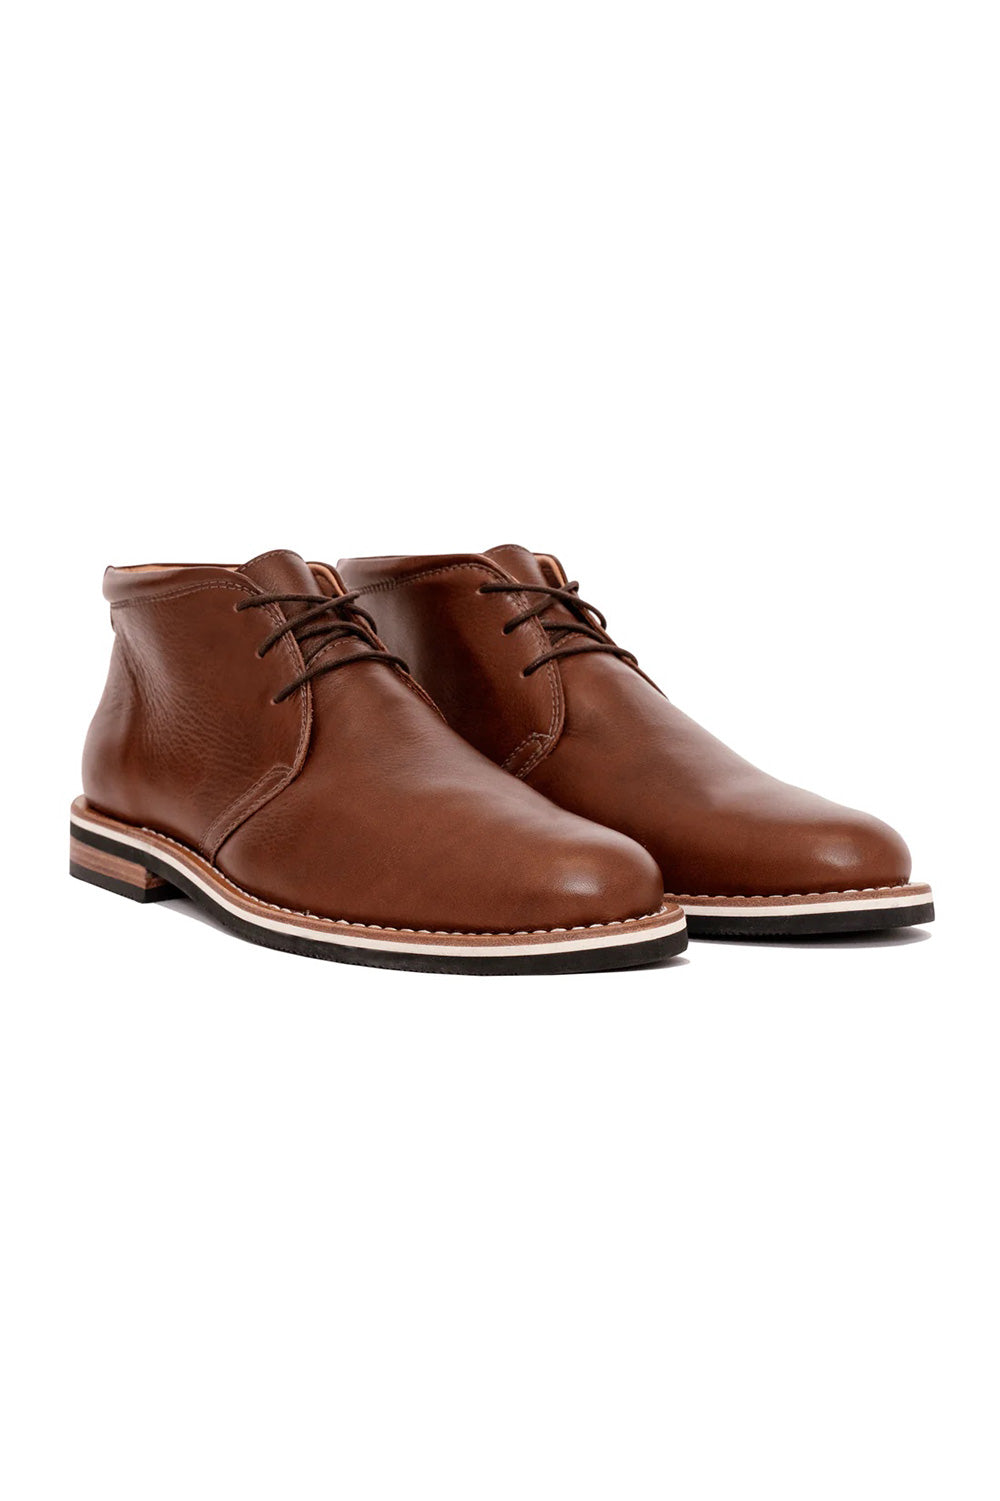 Helm Boots - The Hynes - Brown - Profile